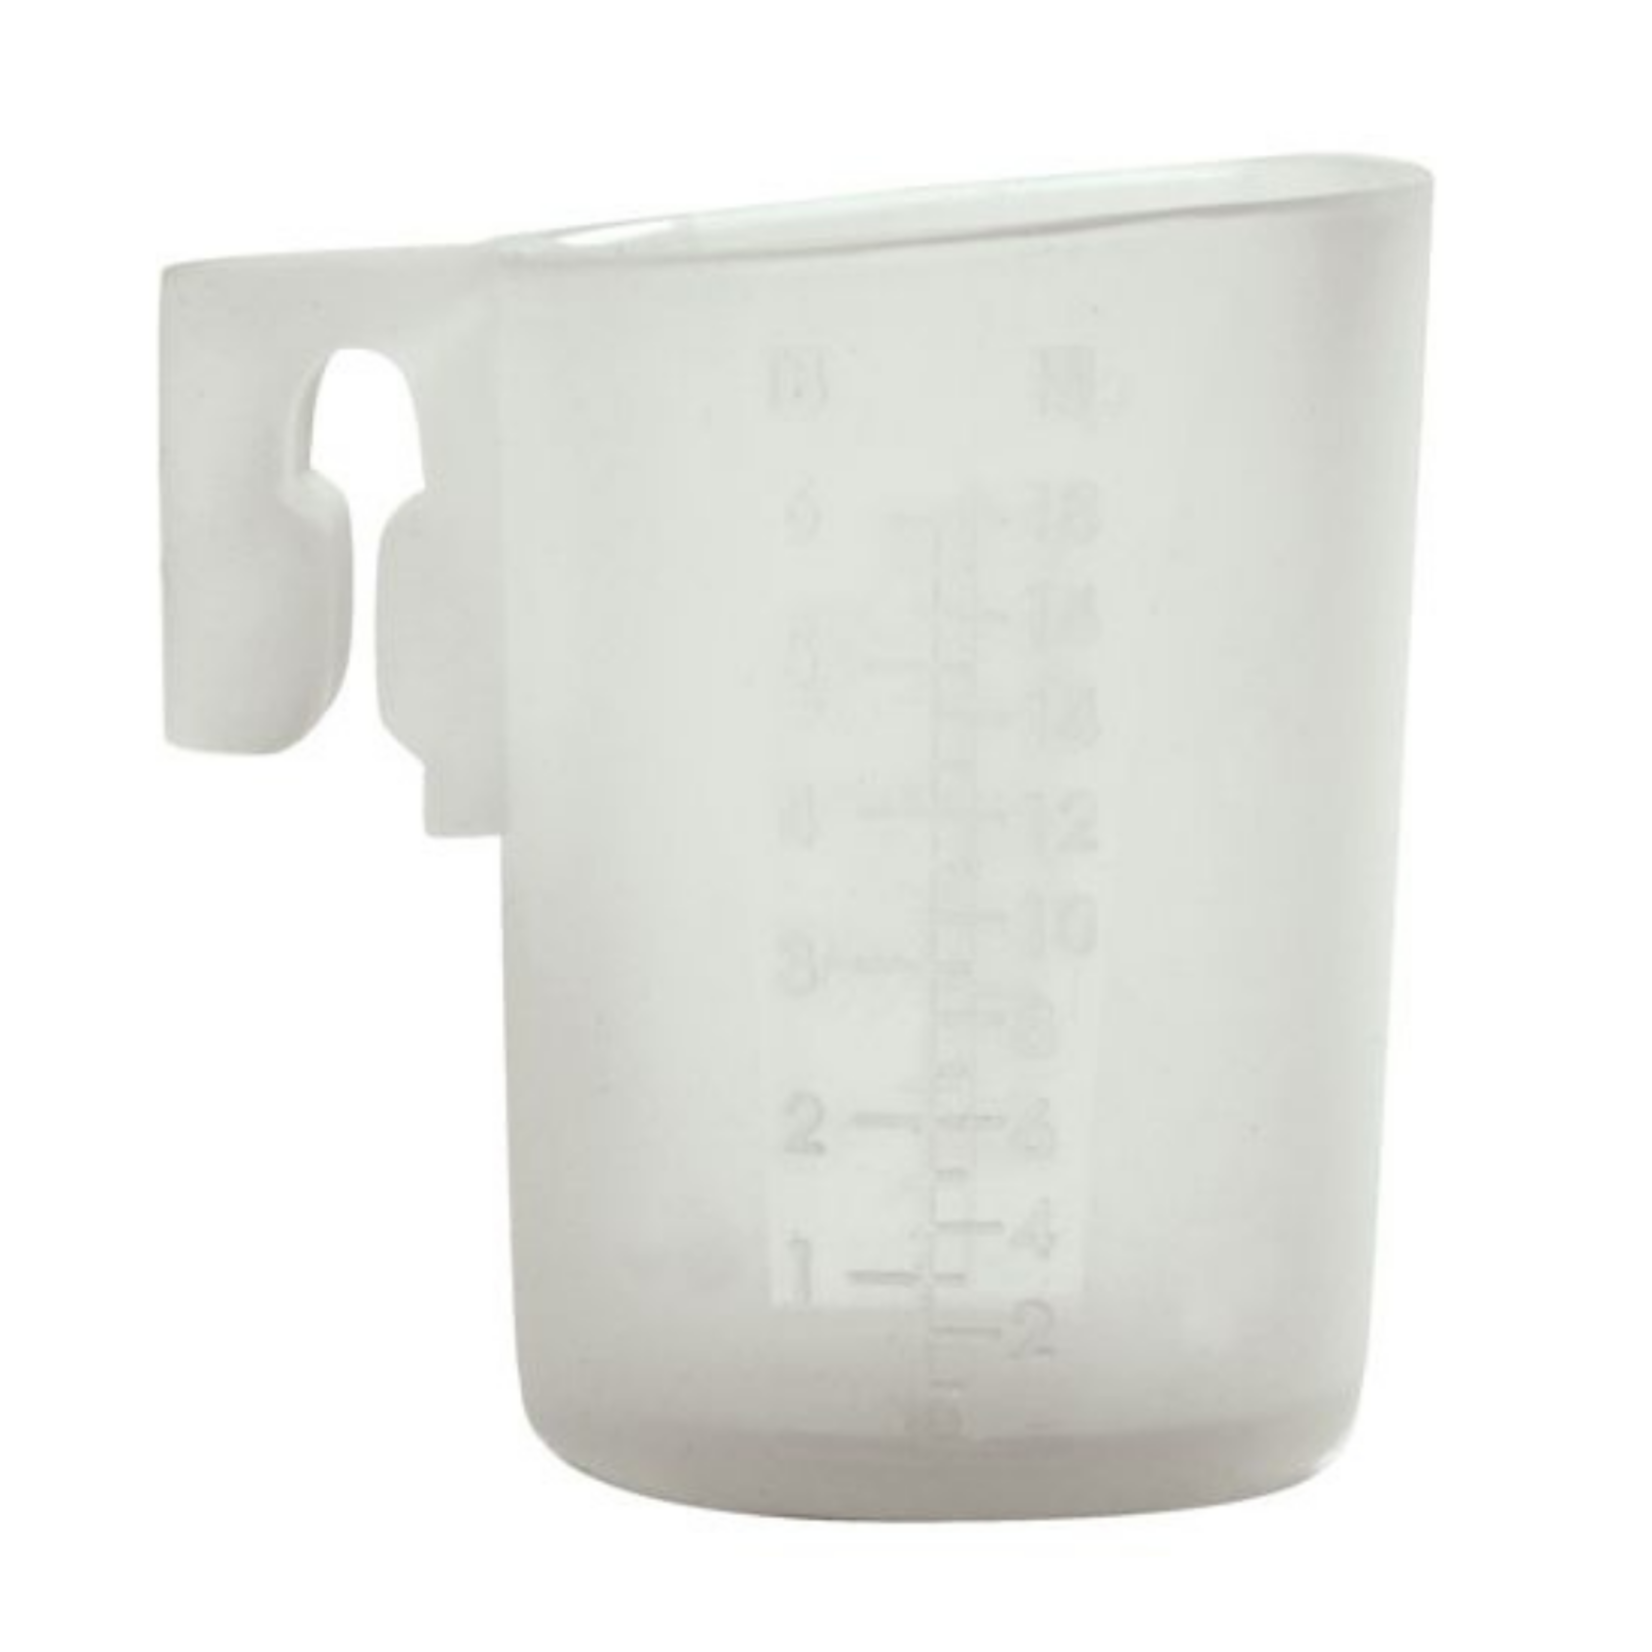 SIL. MINI MEASURE CUP 3013D 18/case - Lily's TV Items